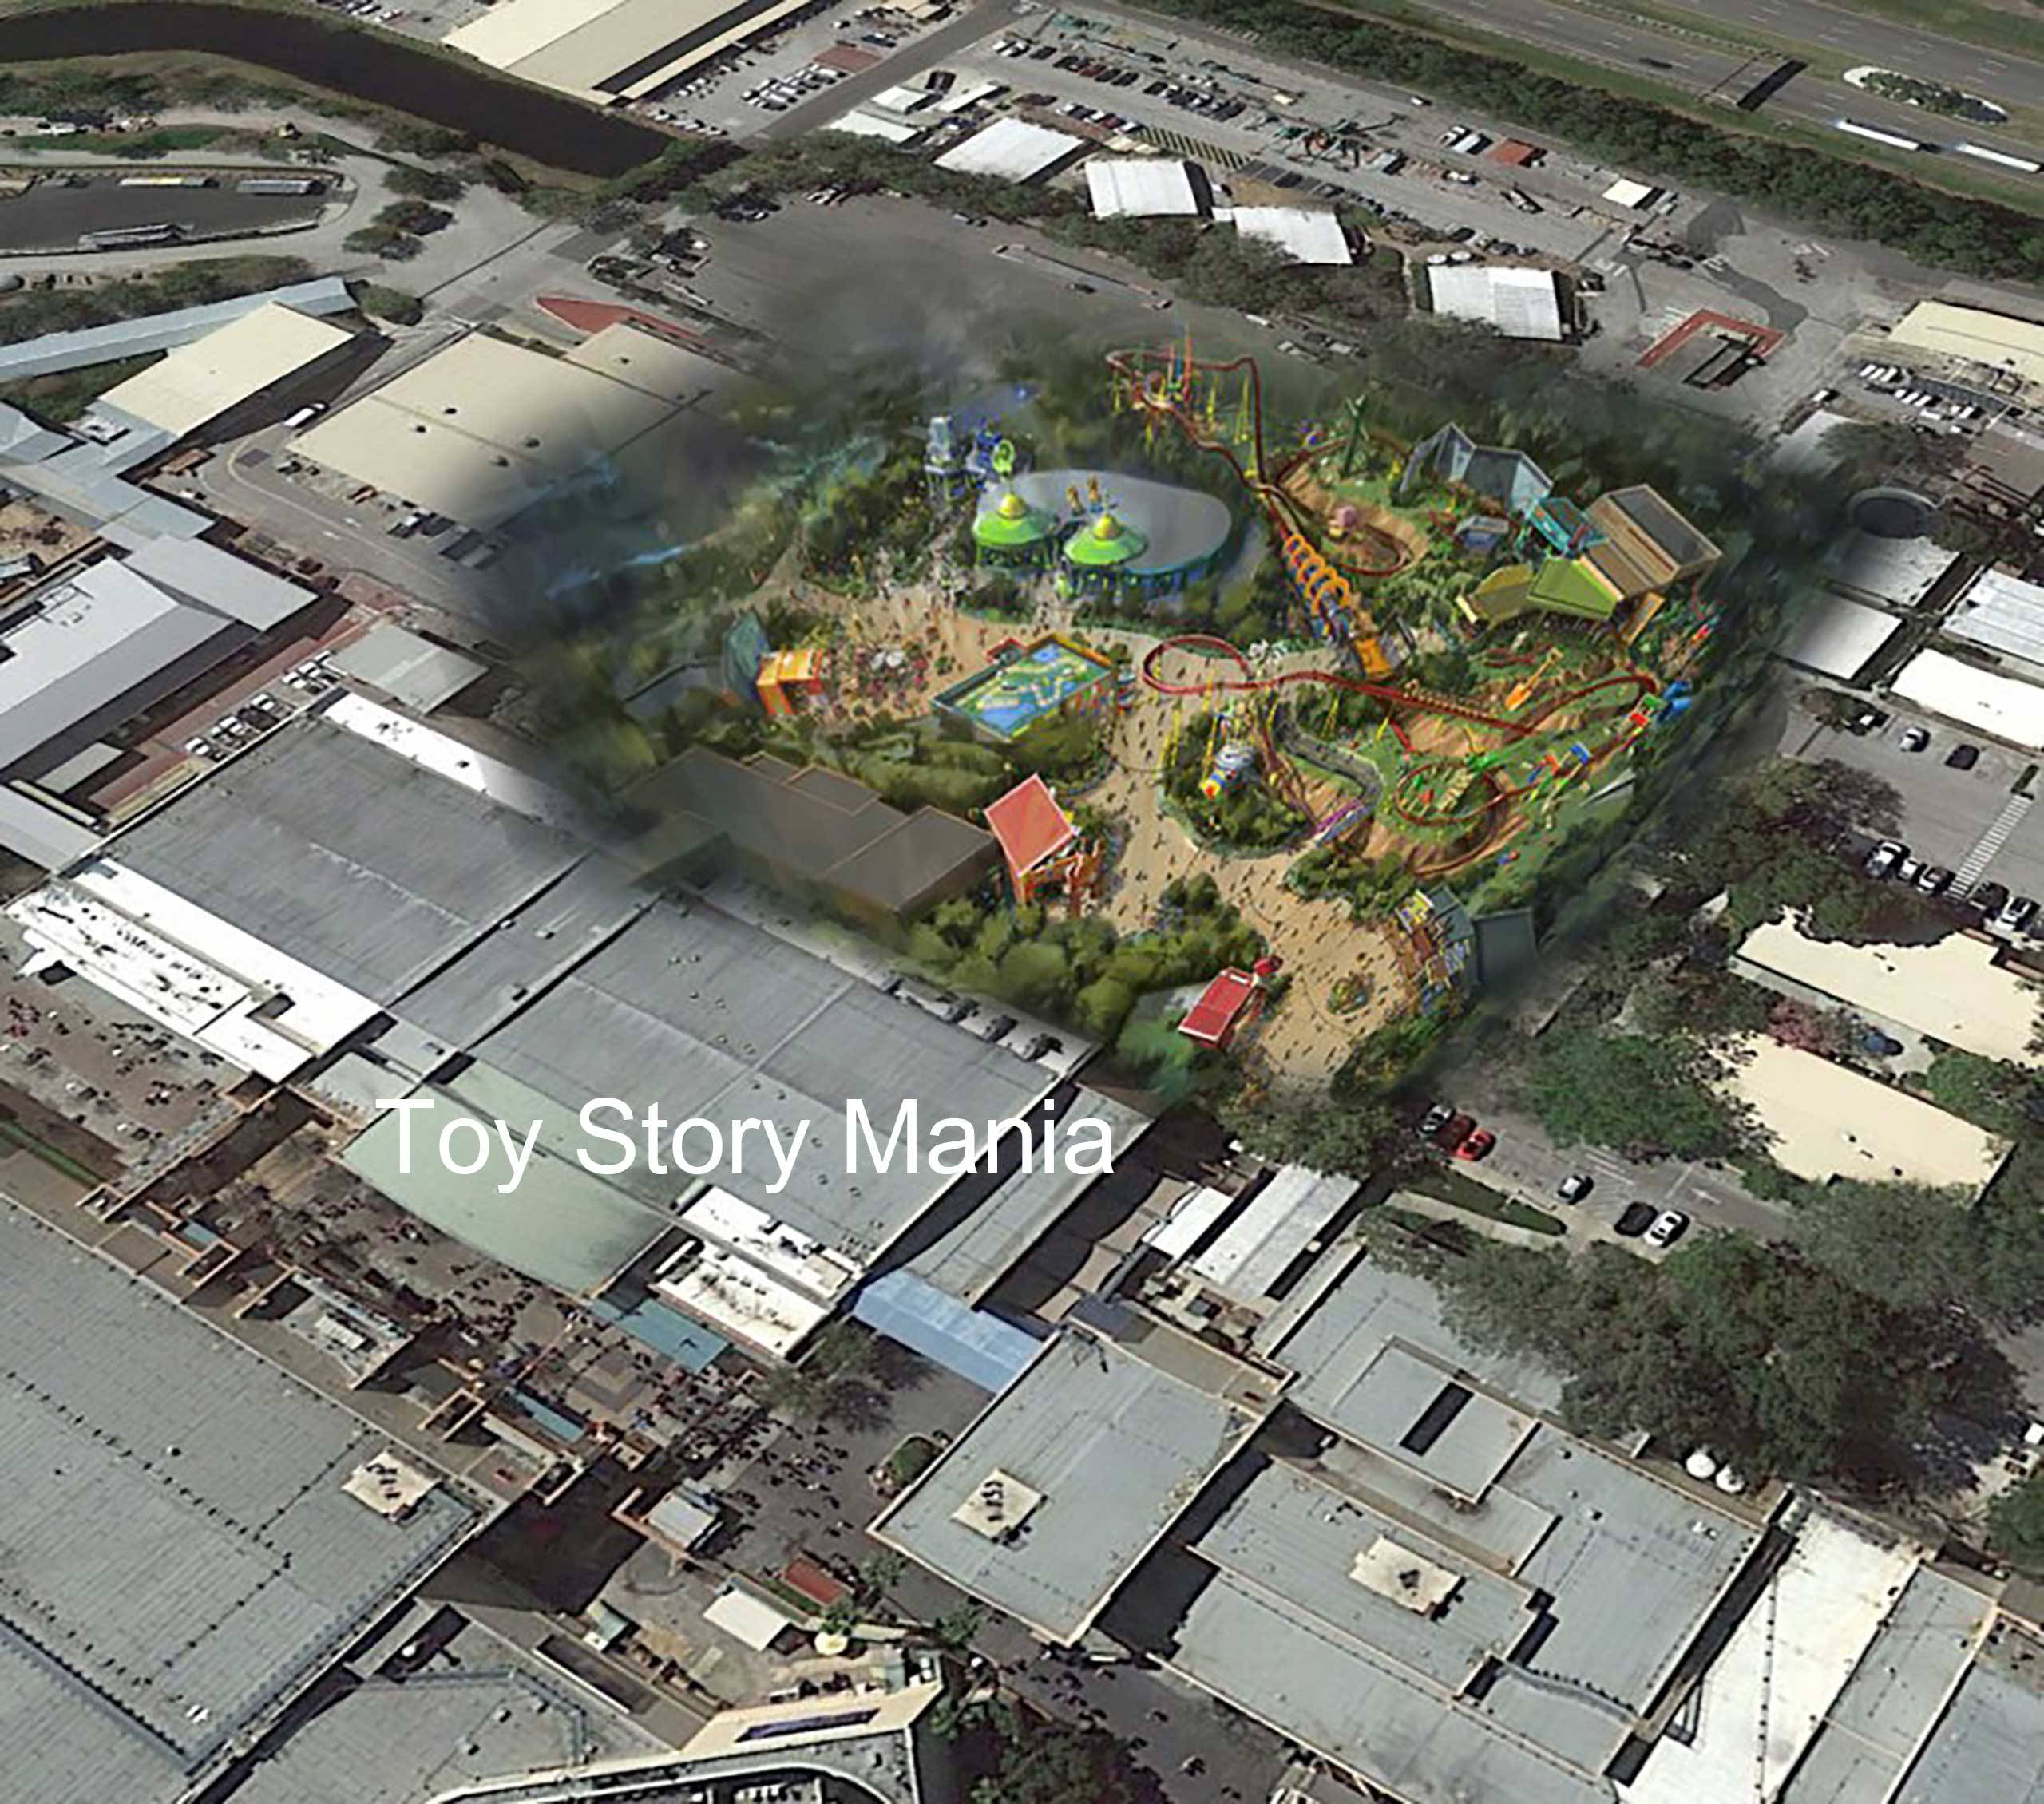 Star Wars Land and Toy Story Land possible locations